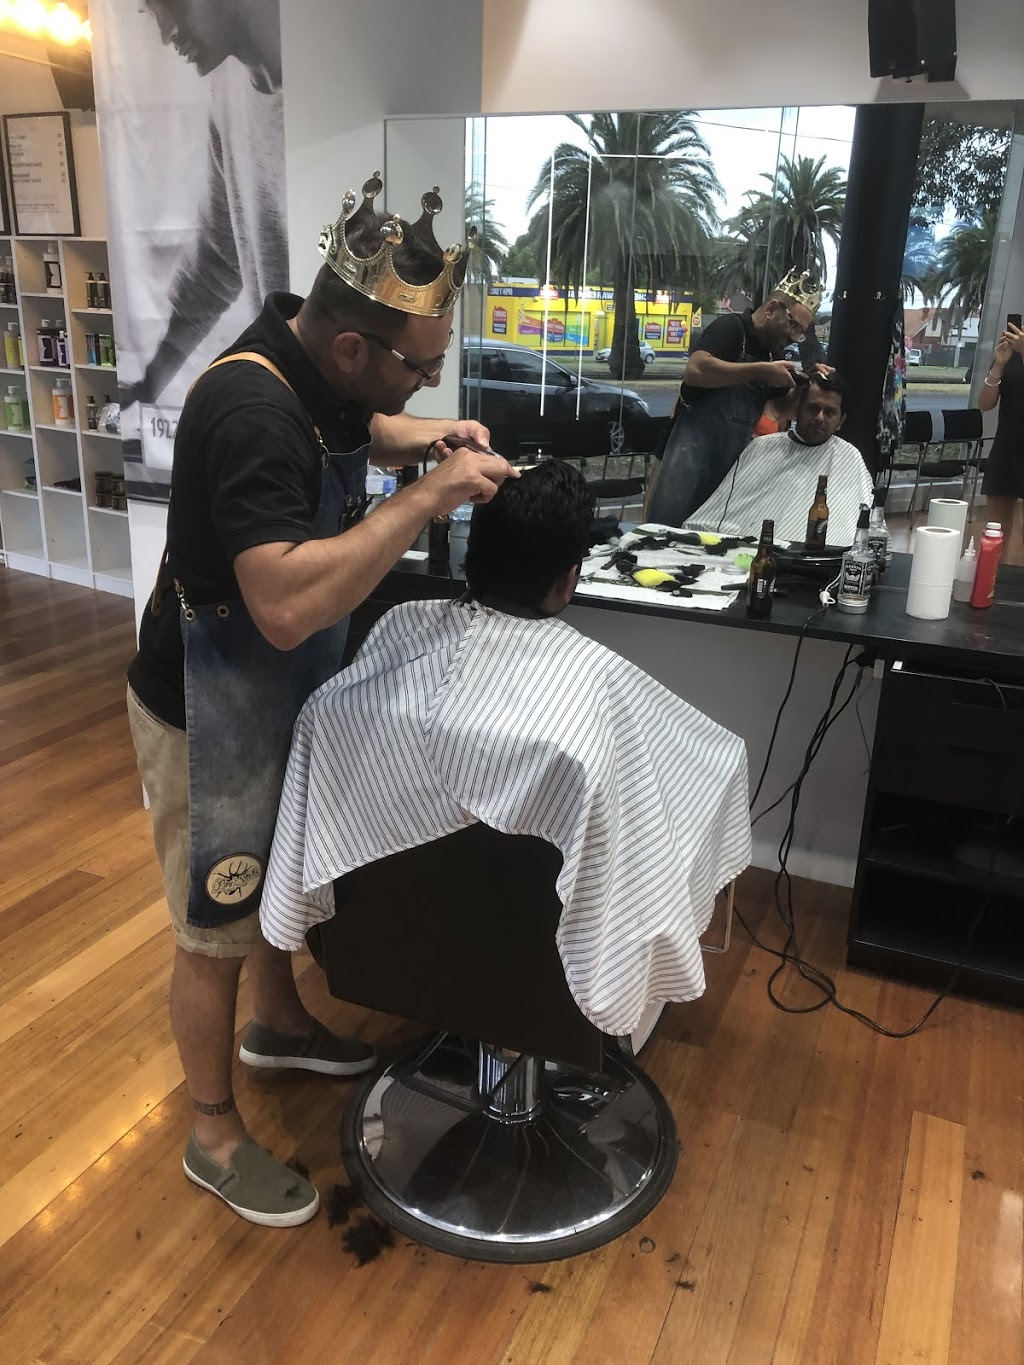 King Of Clippers | shop 2/1072 Mt Alexander Rd, Essendon North VIC 3040, Australia | Phone: (03) 9379 8594